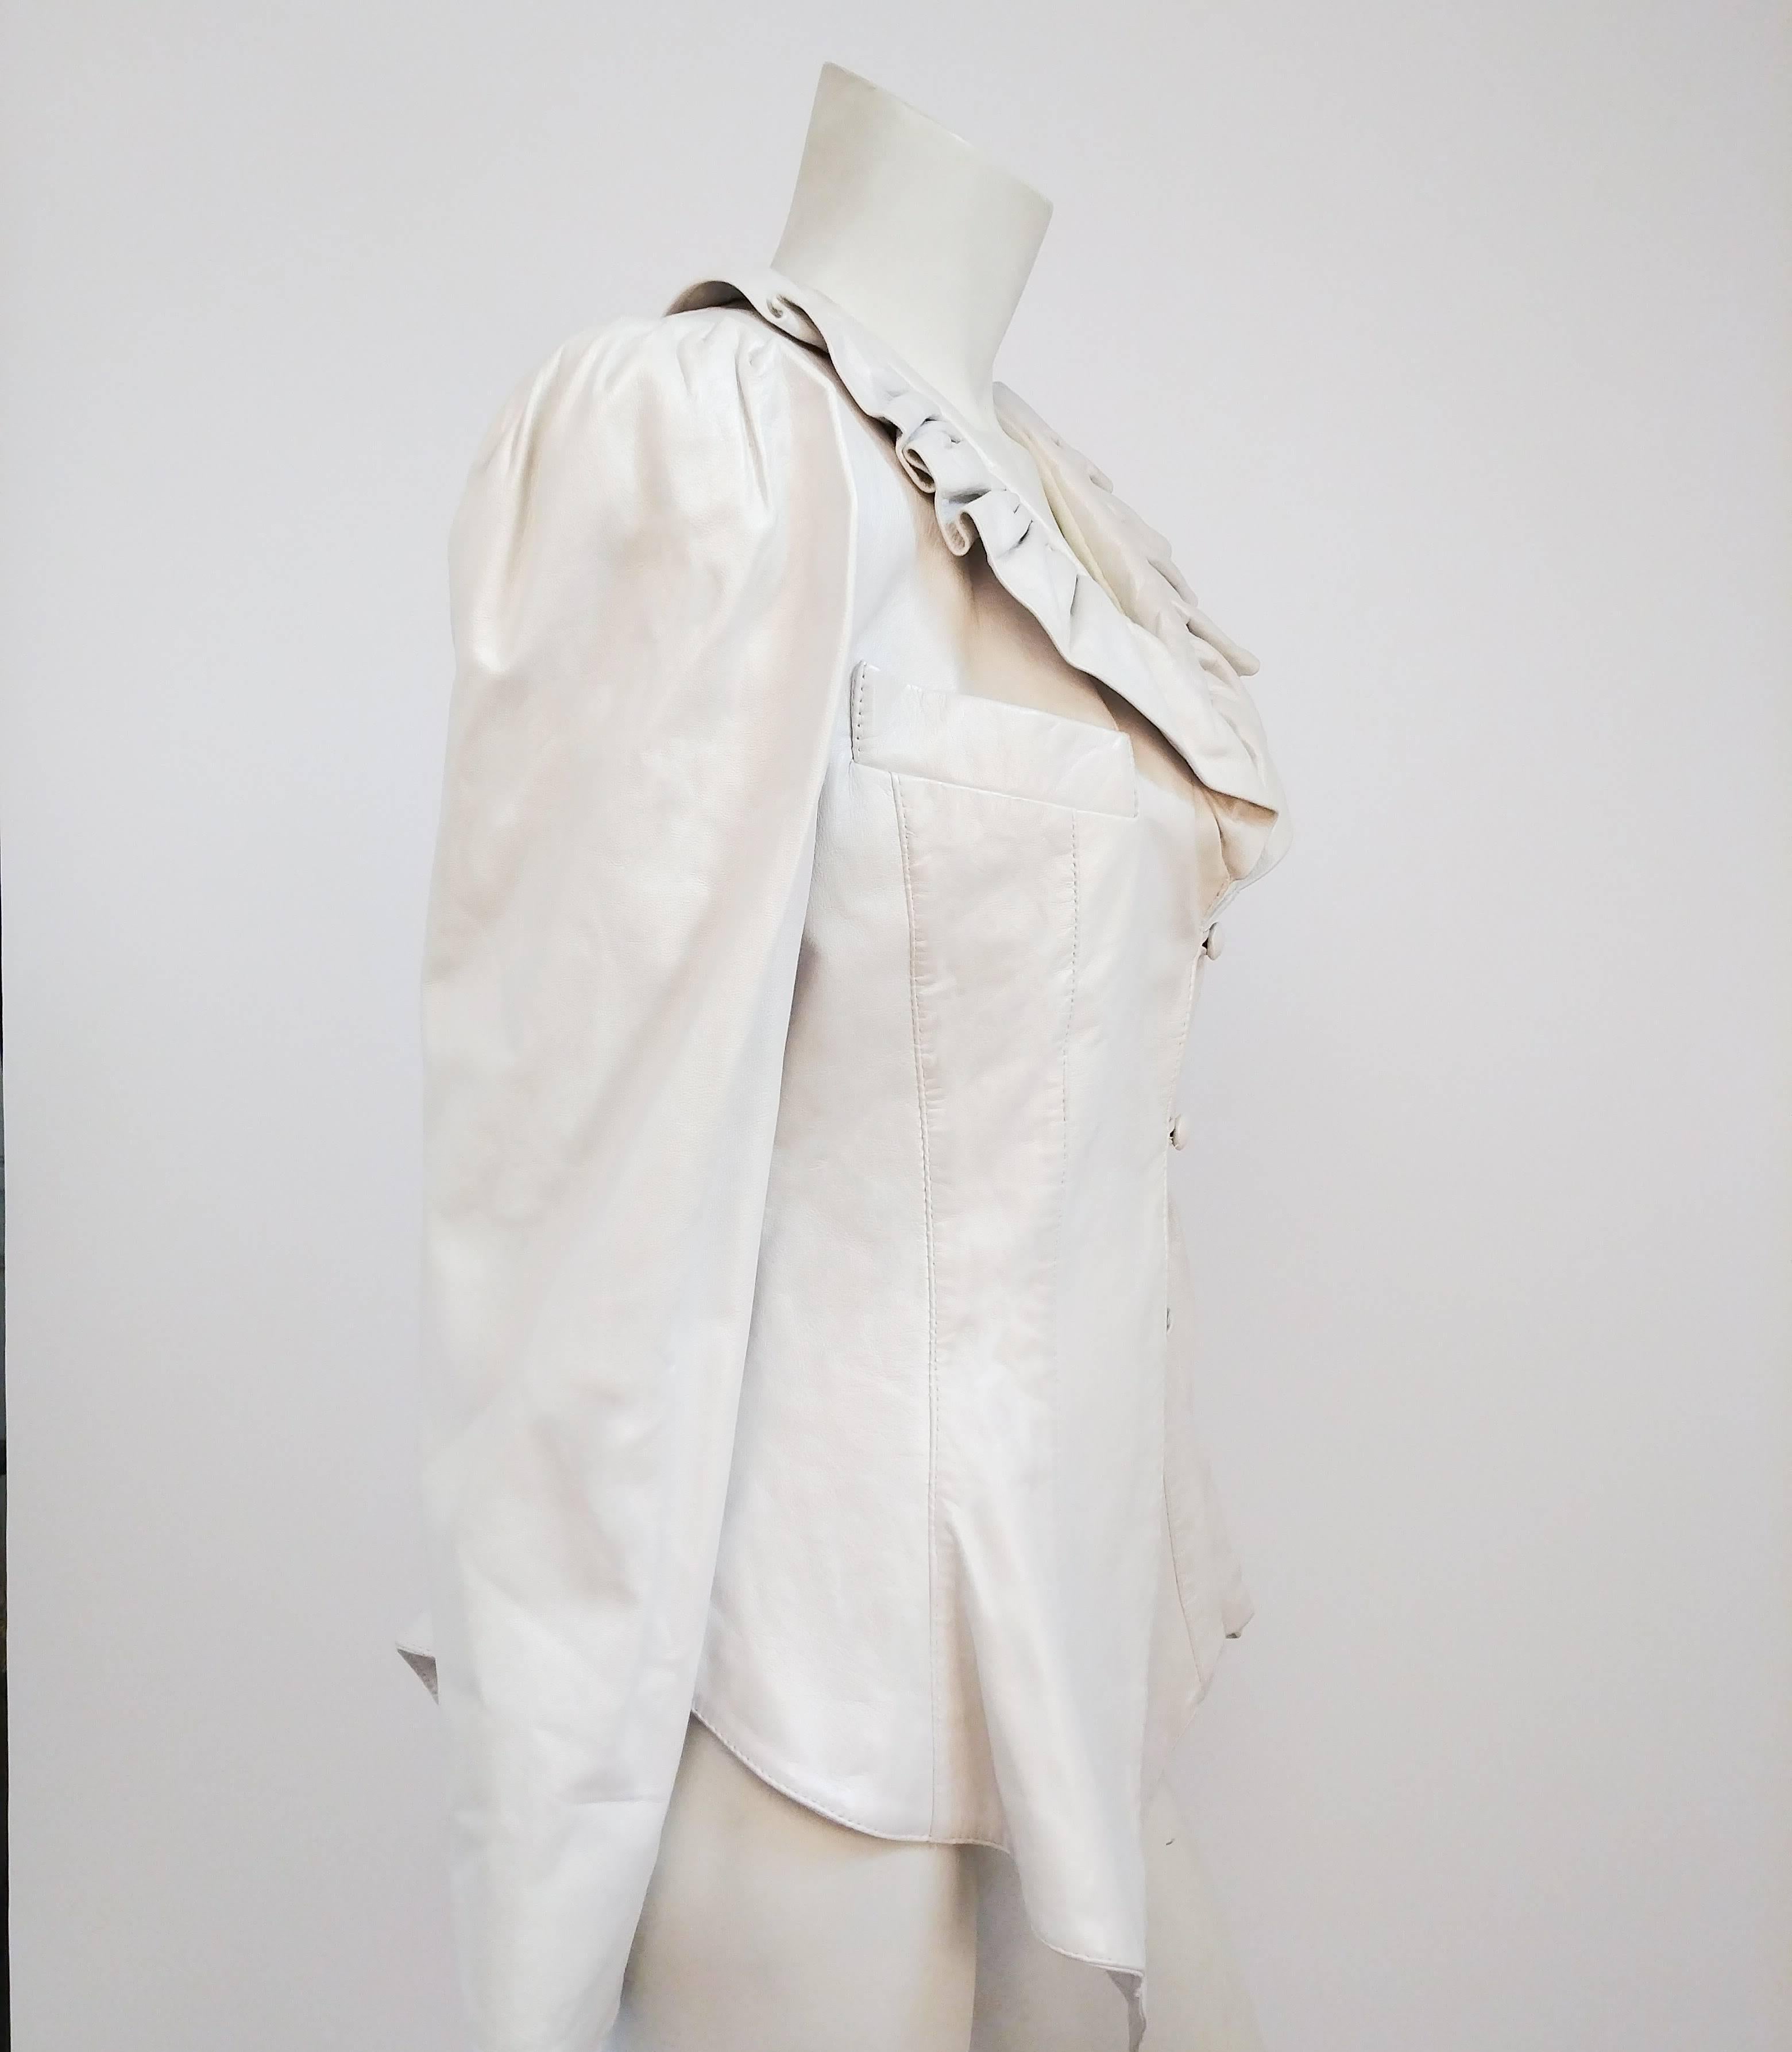 1980s White Leather Jacket . Ruffled collar, buttons down center front. Puffed sleeved pleated into armhole. Flared peplum silhouette. 